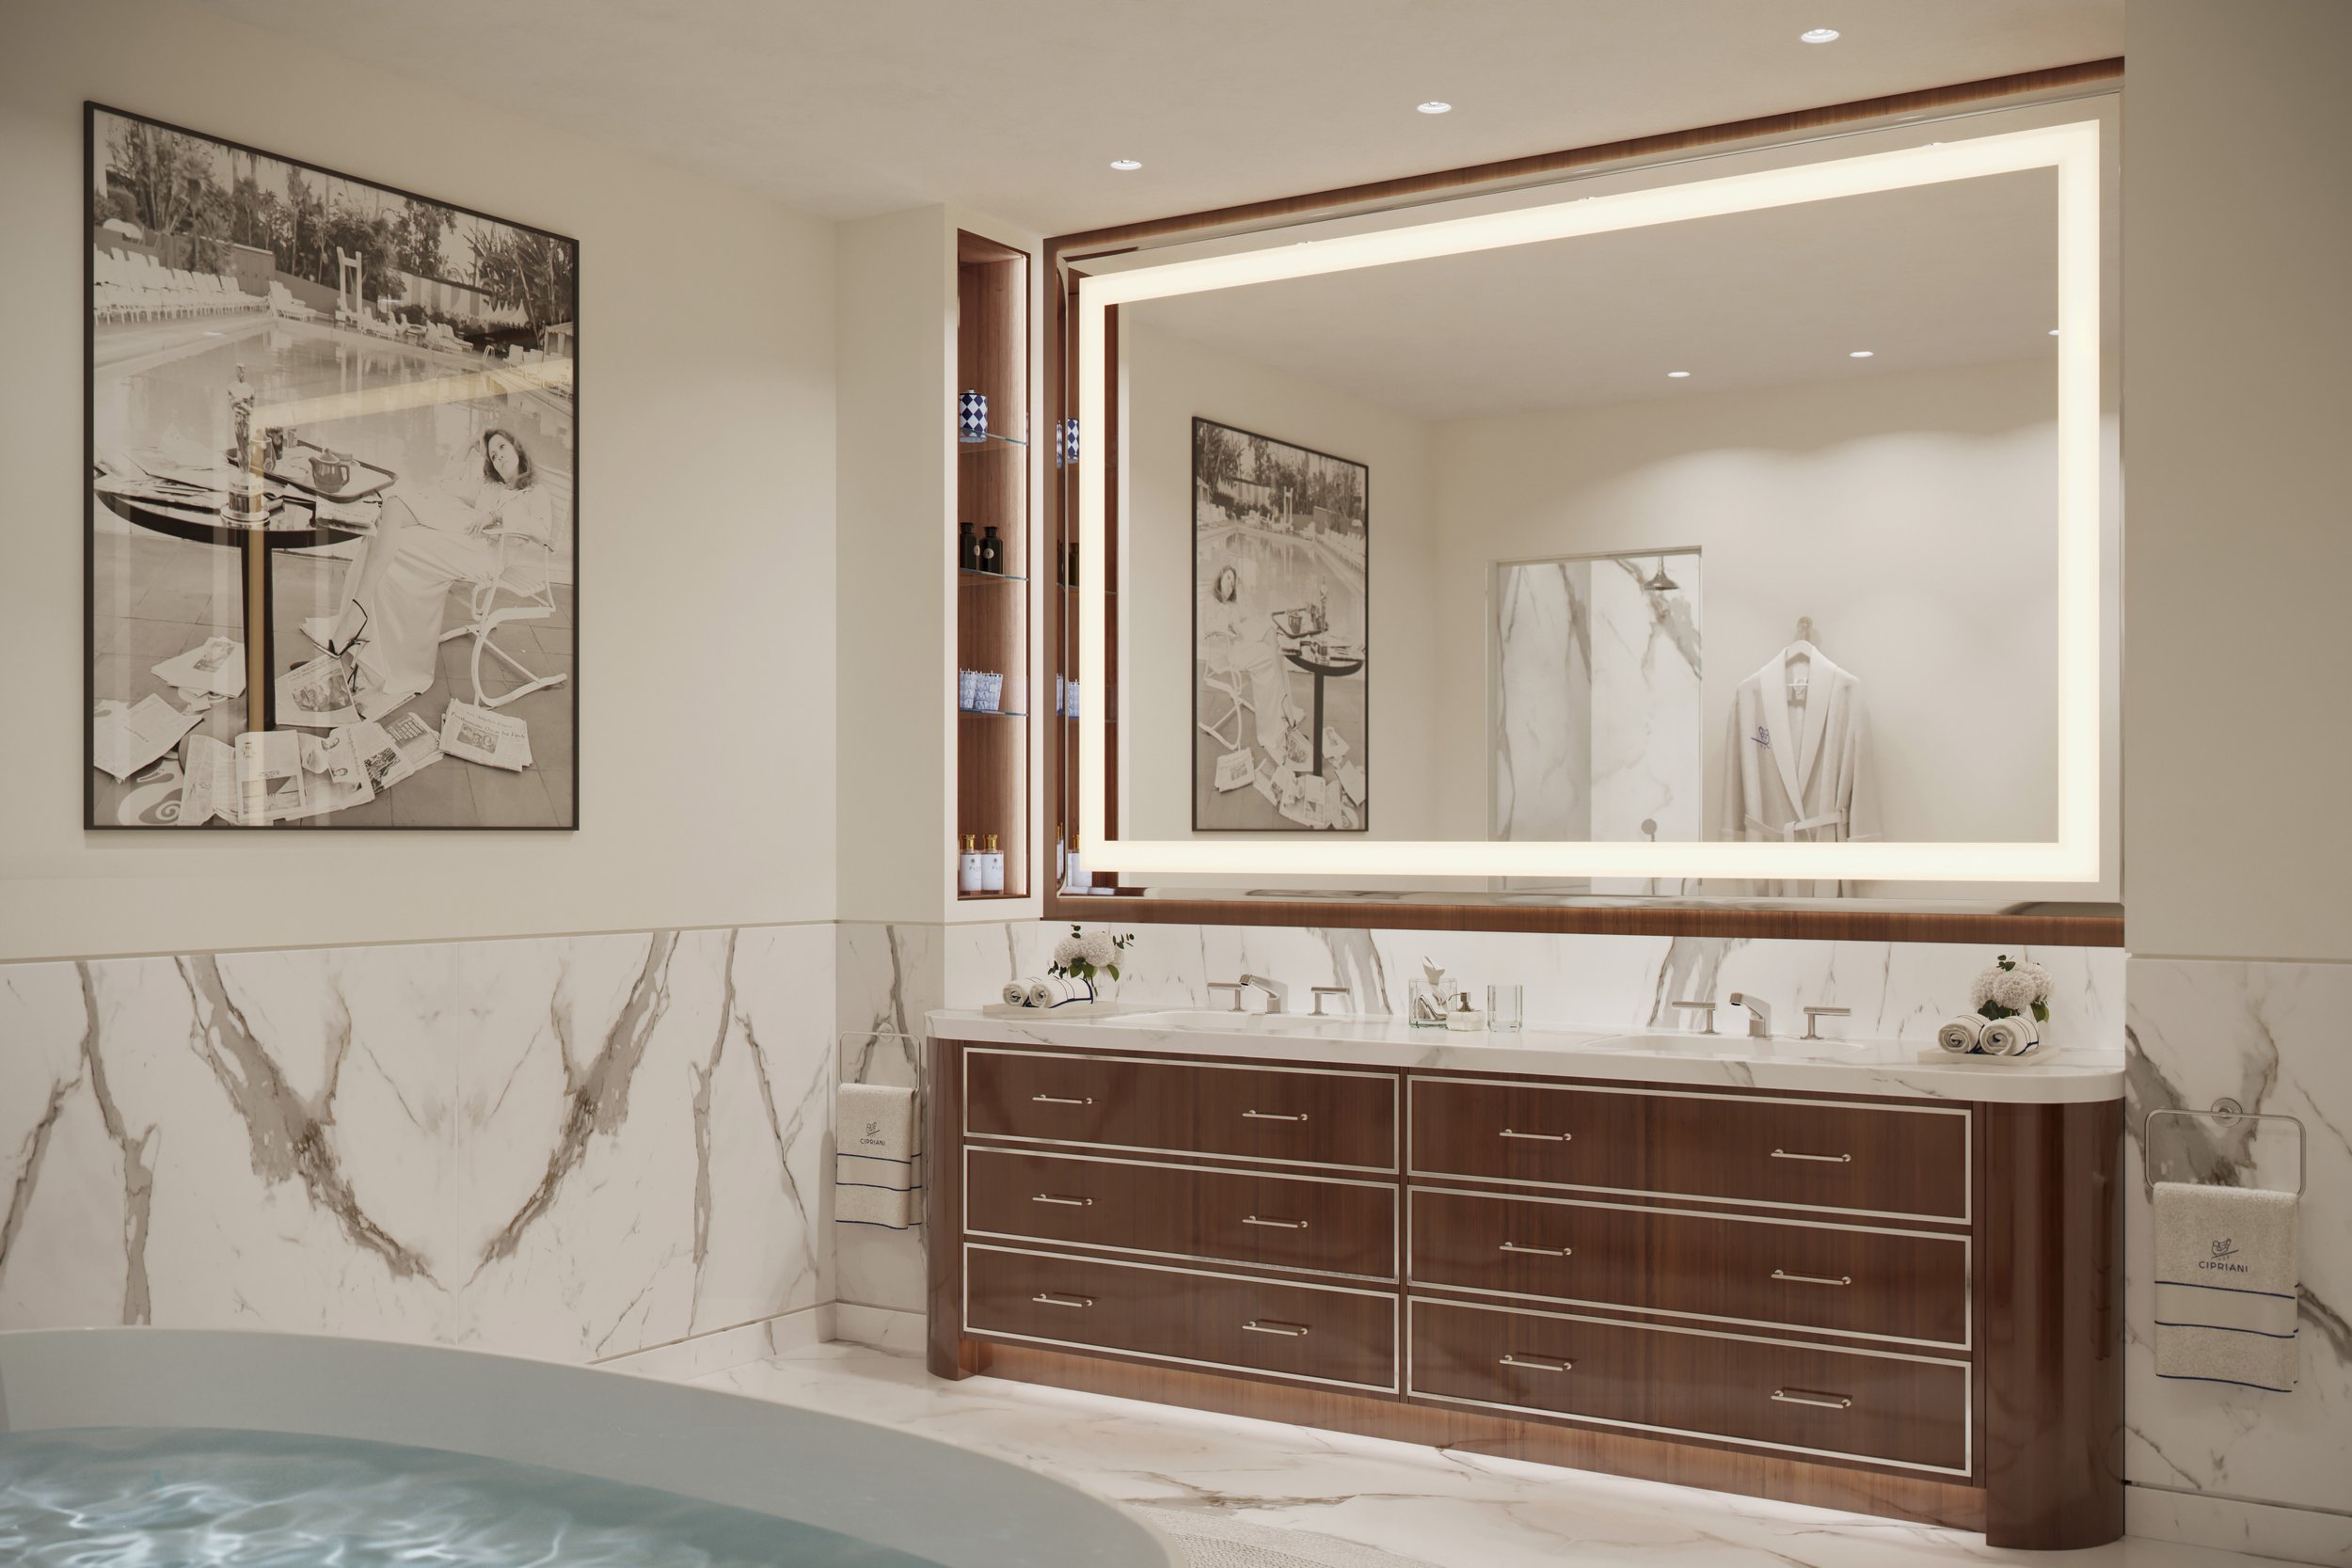 Cipriani Residences Miami Reveals First Look At Interiors By 1508 London 12.jpg